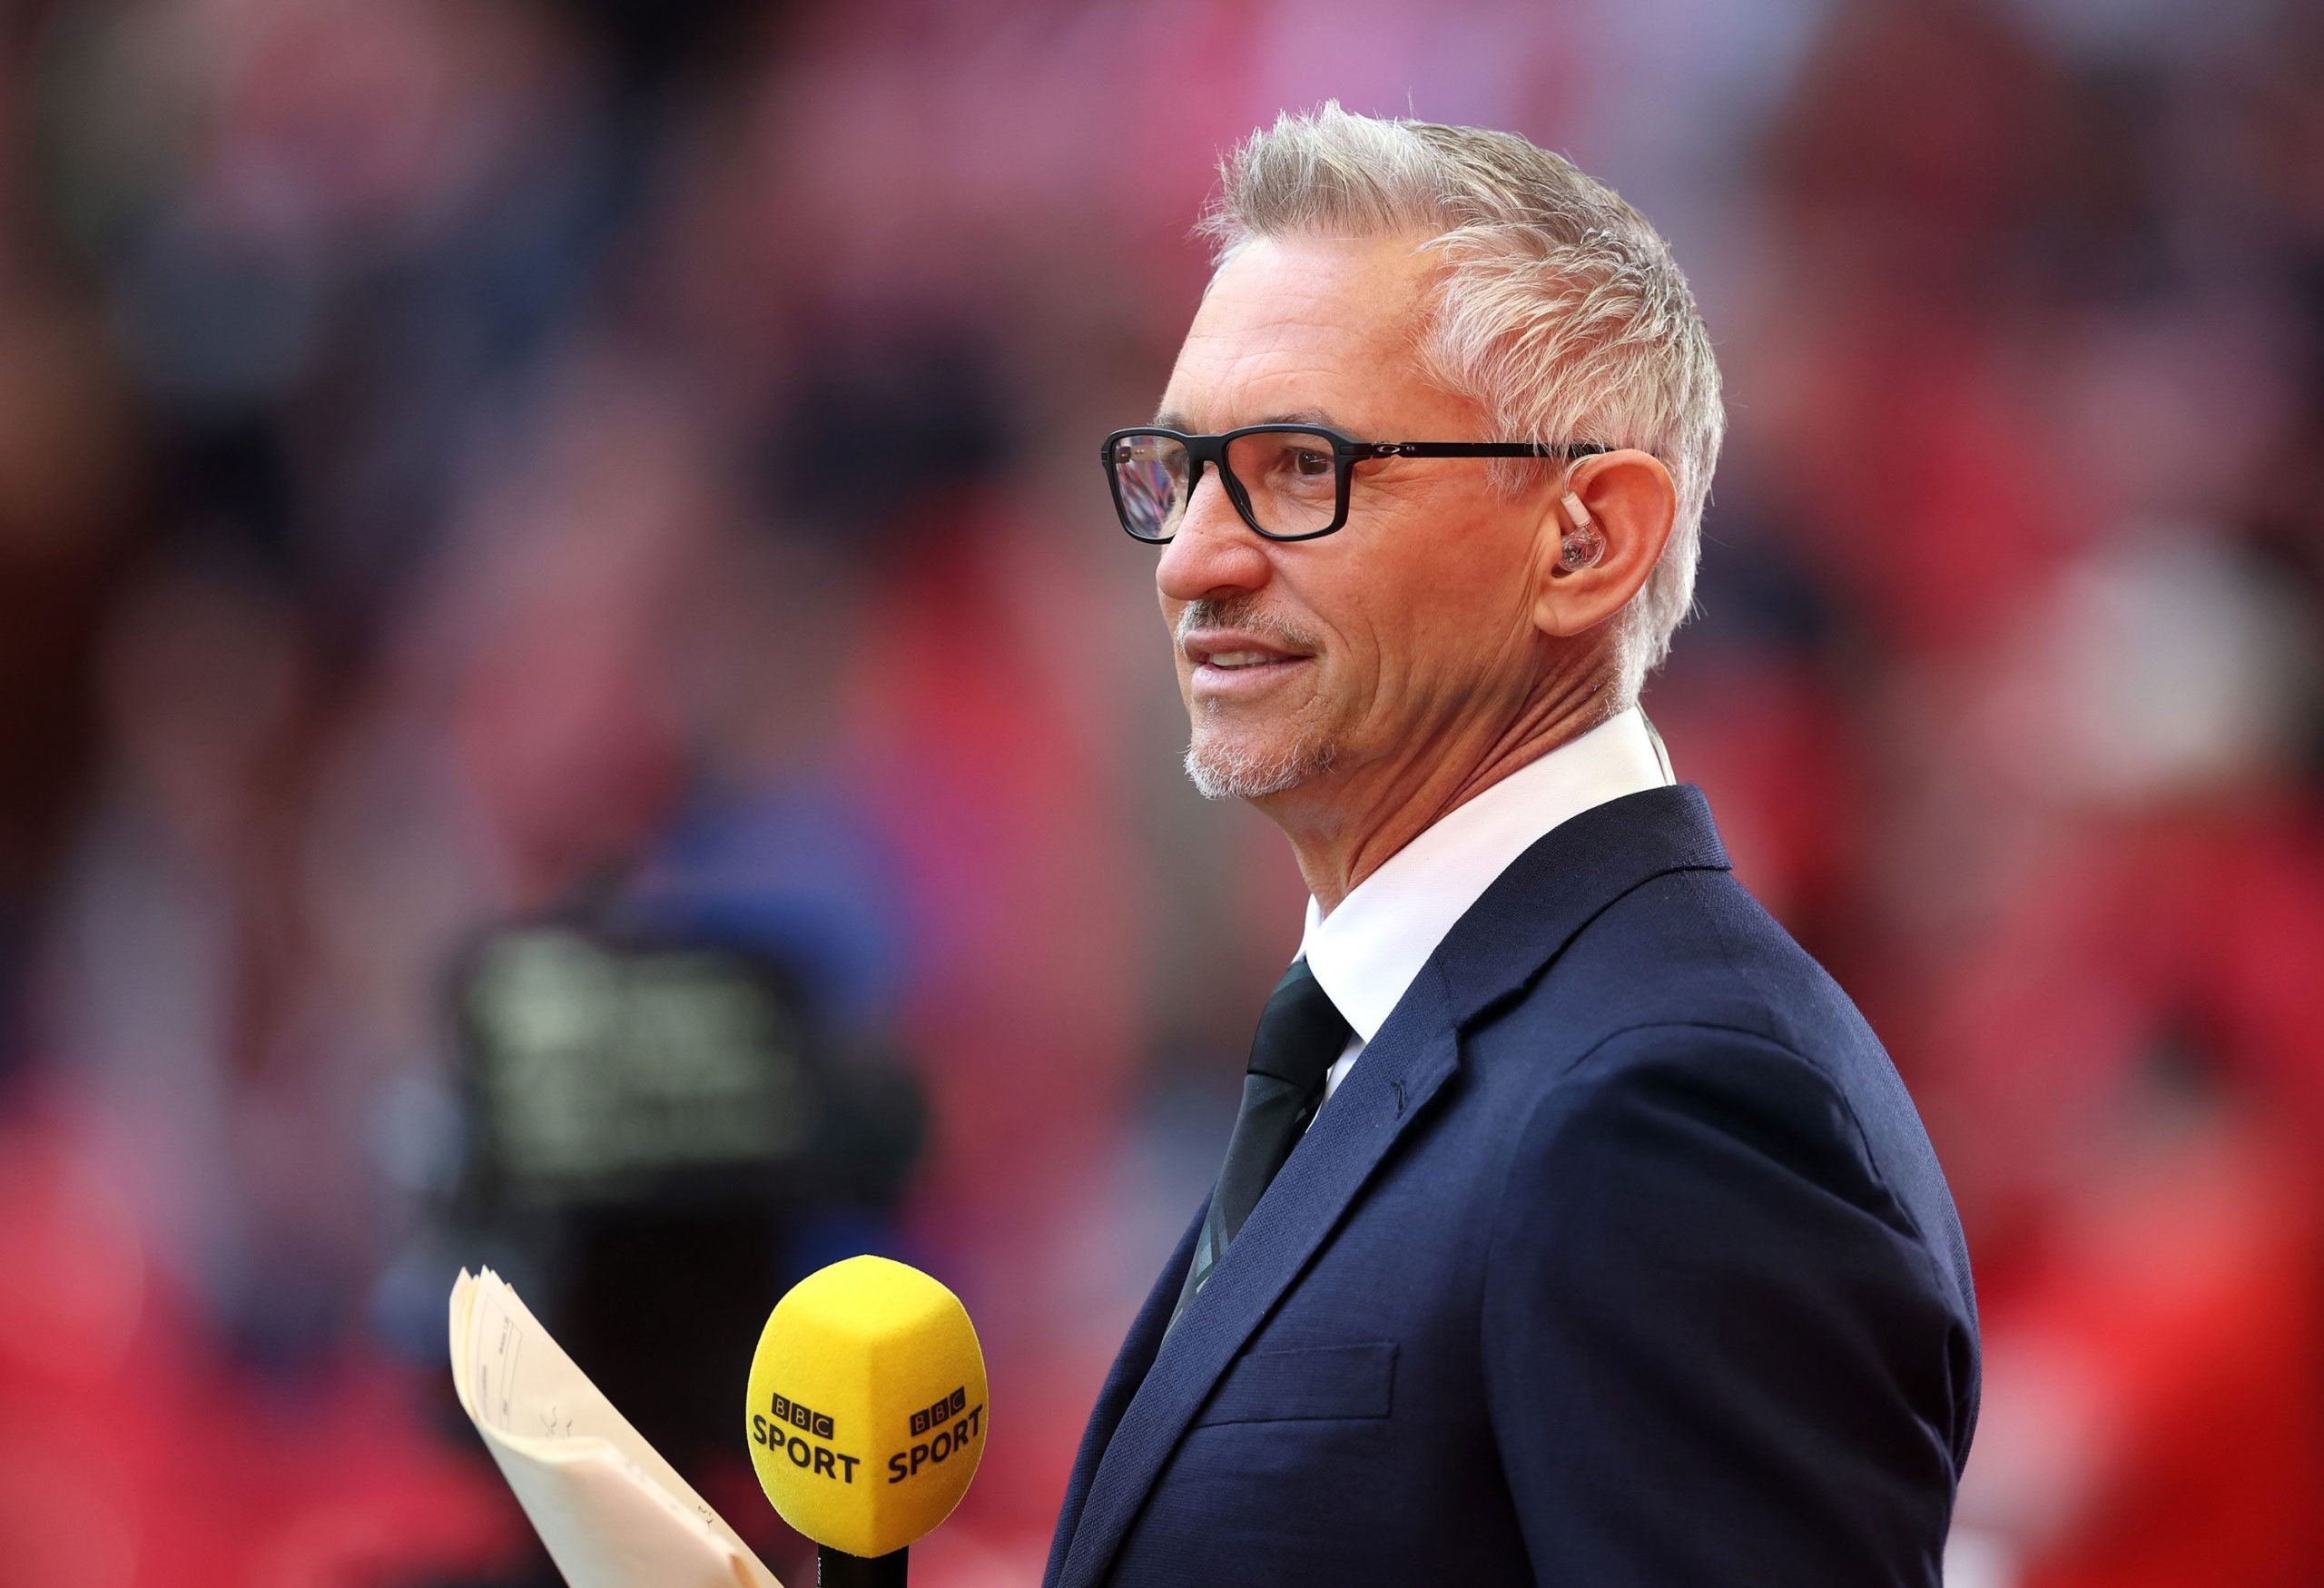 Gary Lineker Shares His Thoughts on Tottenham Hotspur's 2-1 Win Against Sheffield United